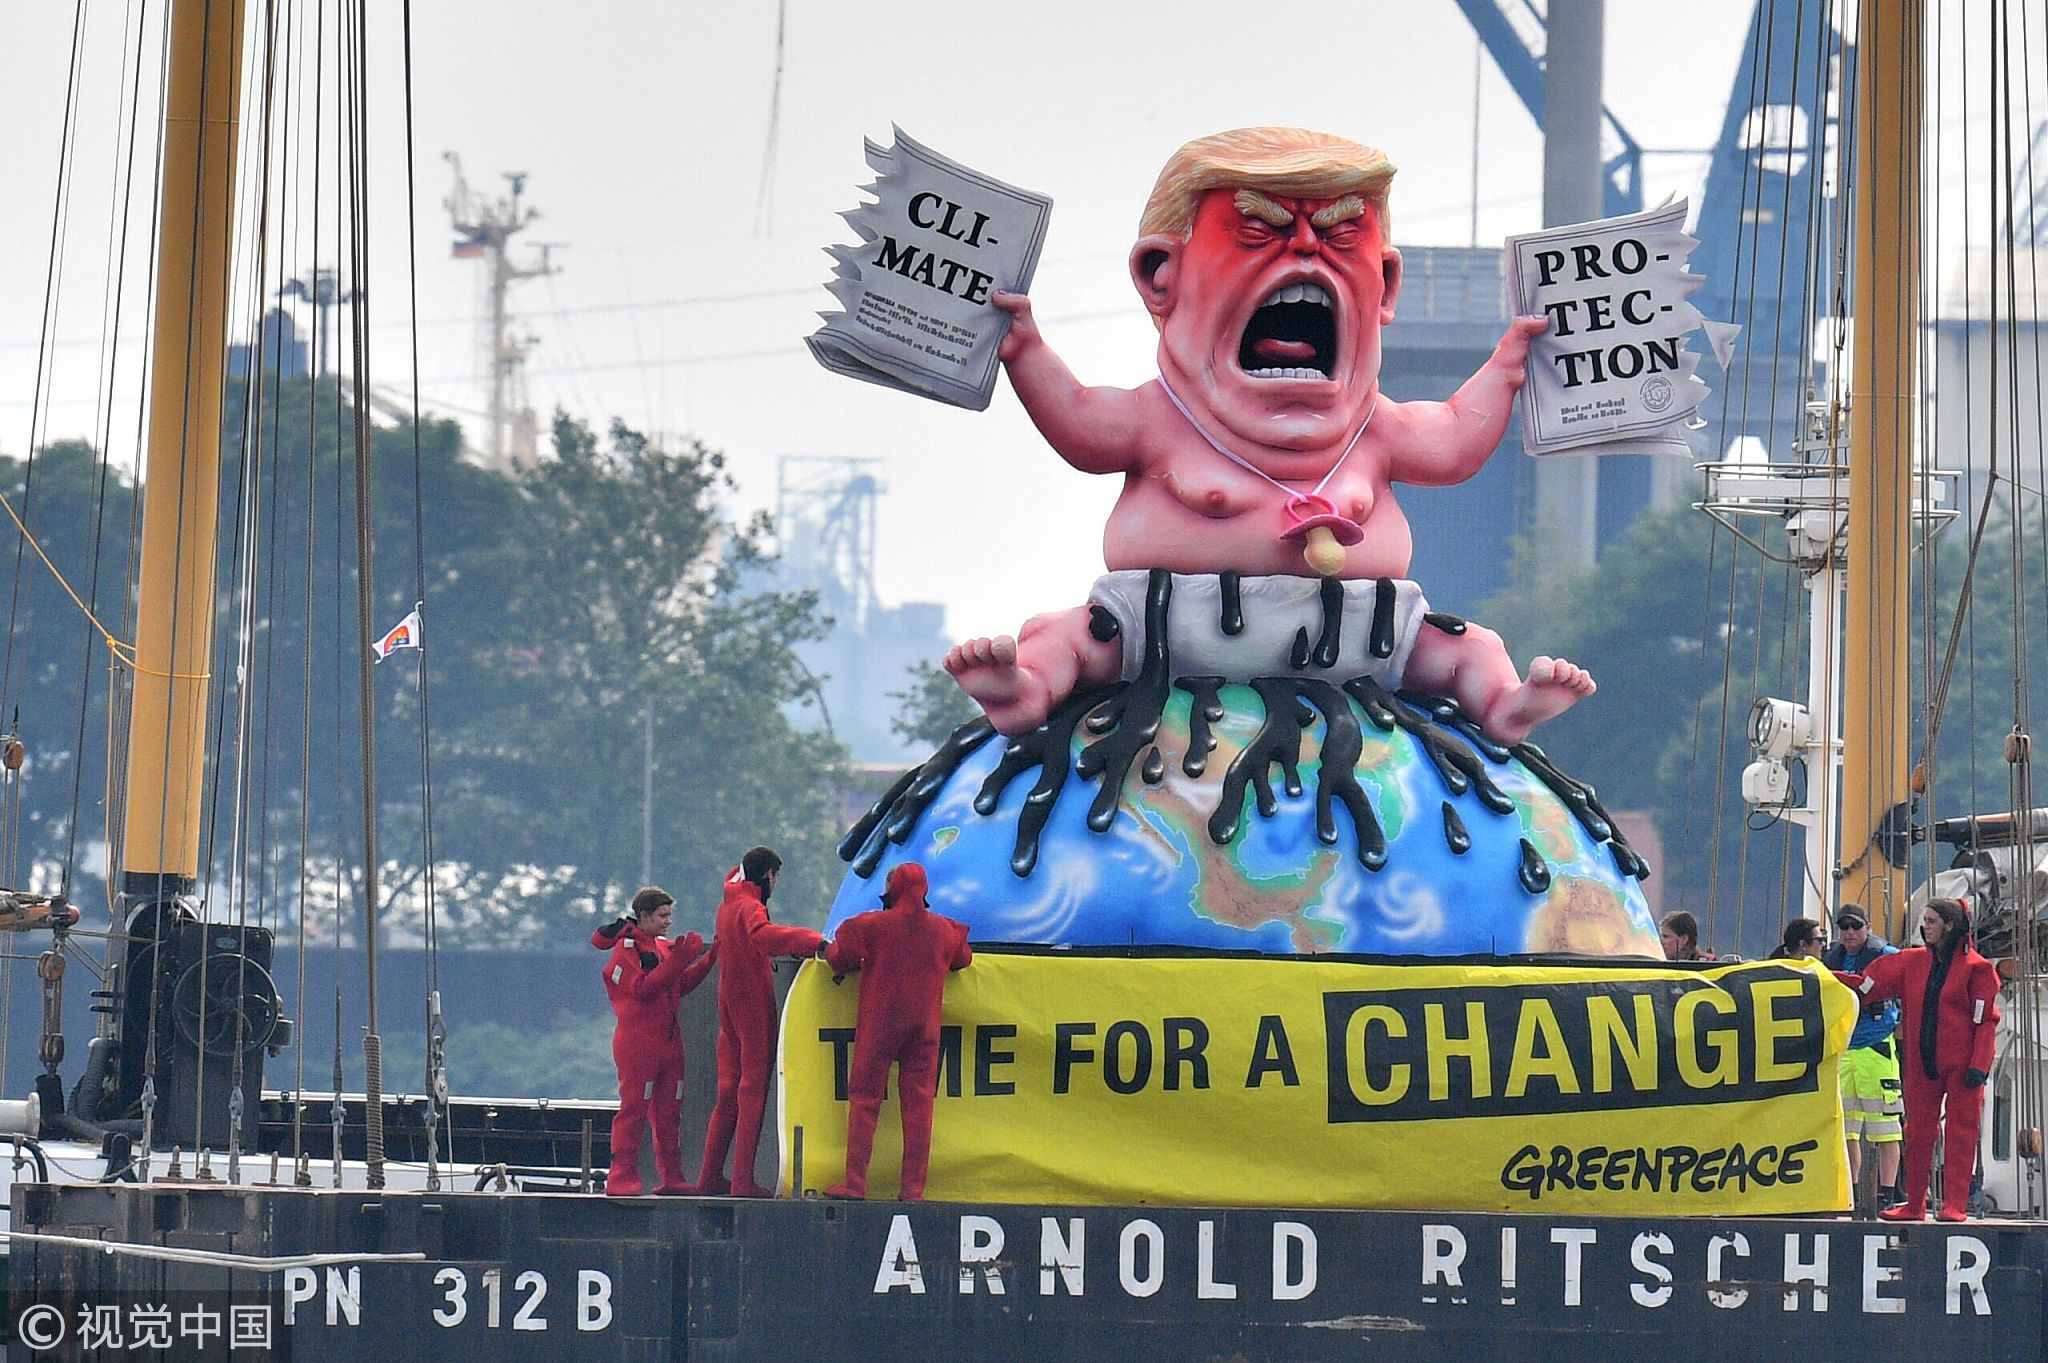 Greenpeace activists protest on a boat with a giant figure featuring US President Donald Trump as a baby, tearing up a climate protection document, on July 7, 2017, in Hamburg, northern Germany. [Photo: VCG]